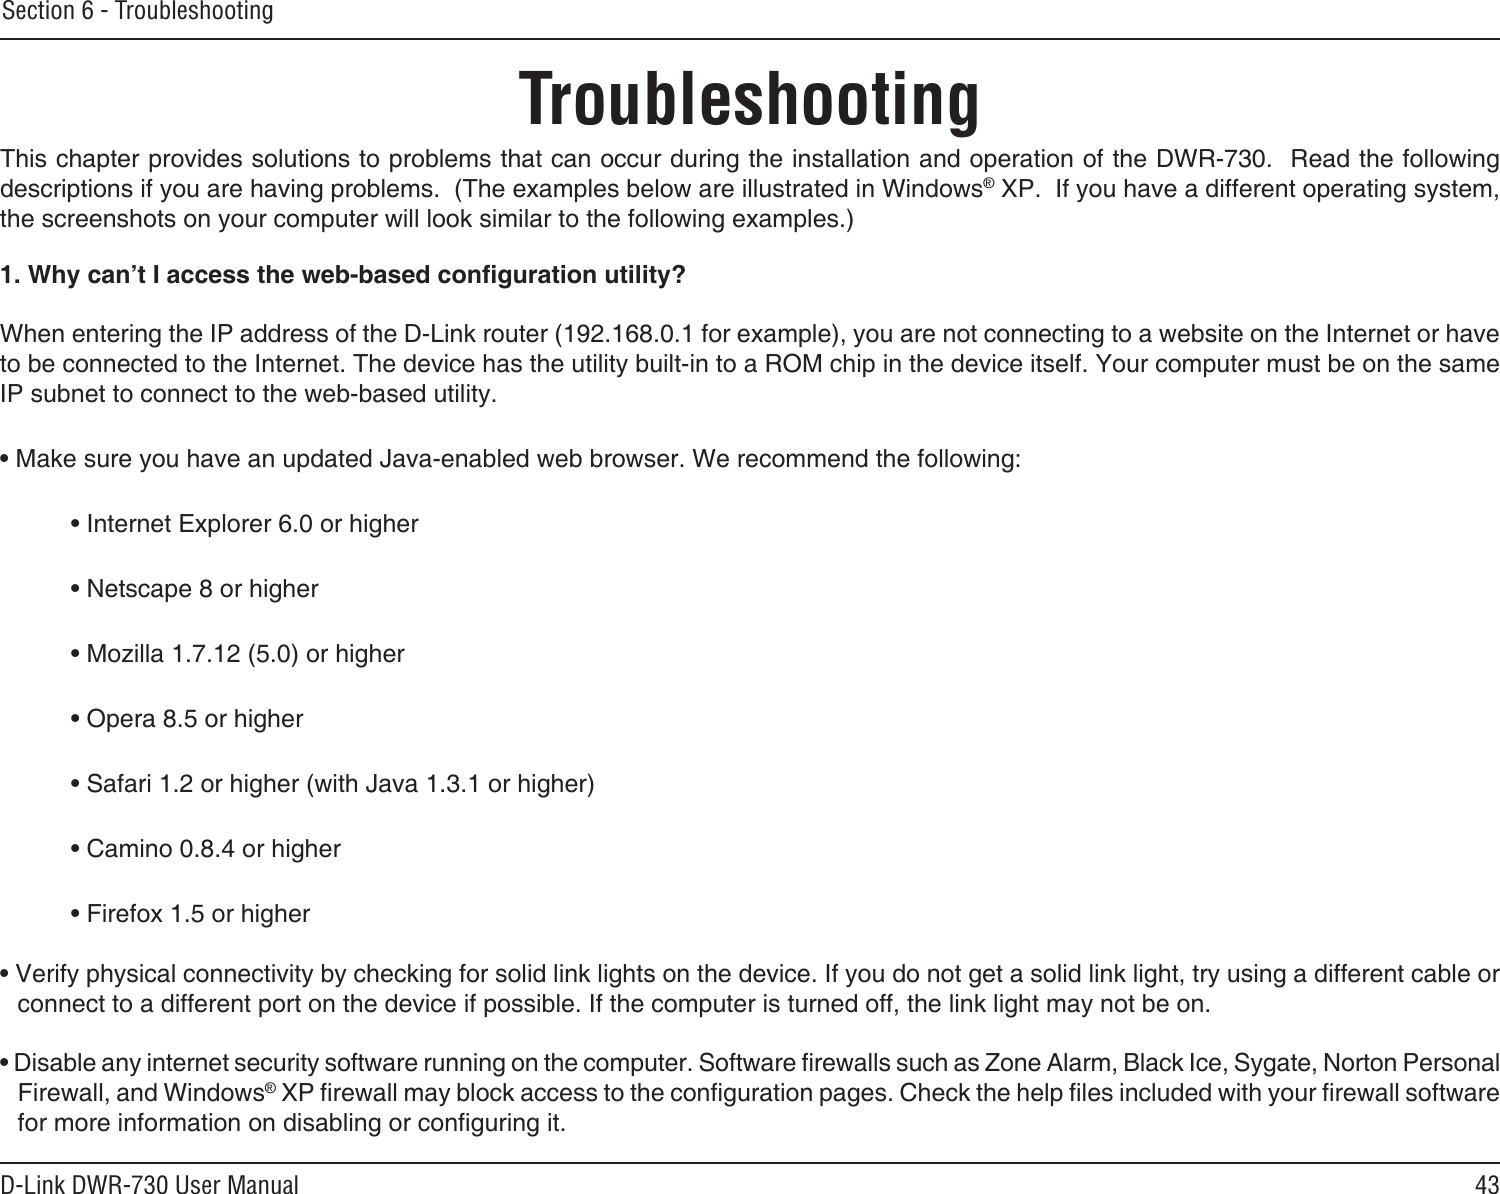 43D-Link DWR-730 User ManualSection 6 - TroubleshootingTroubleshooting